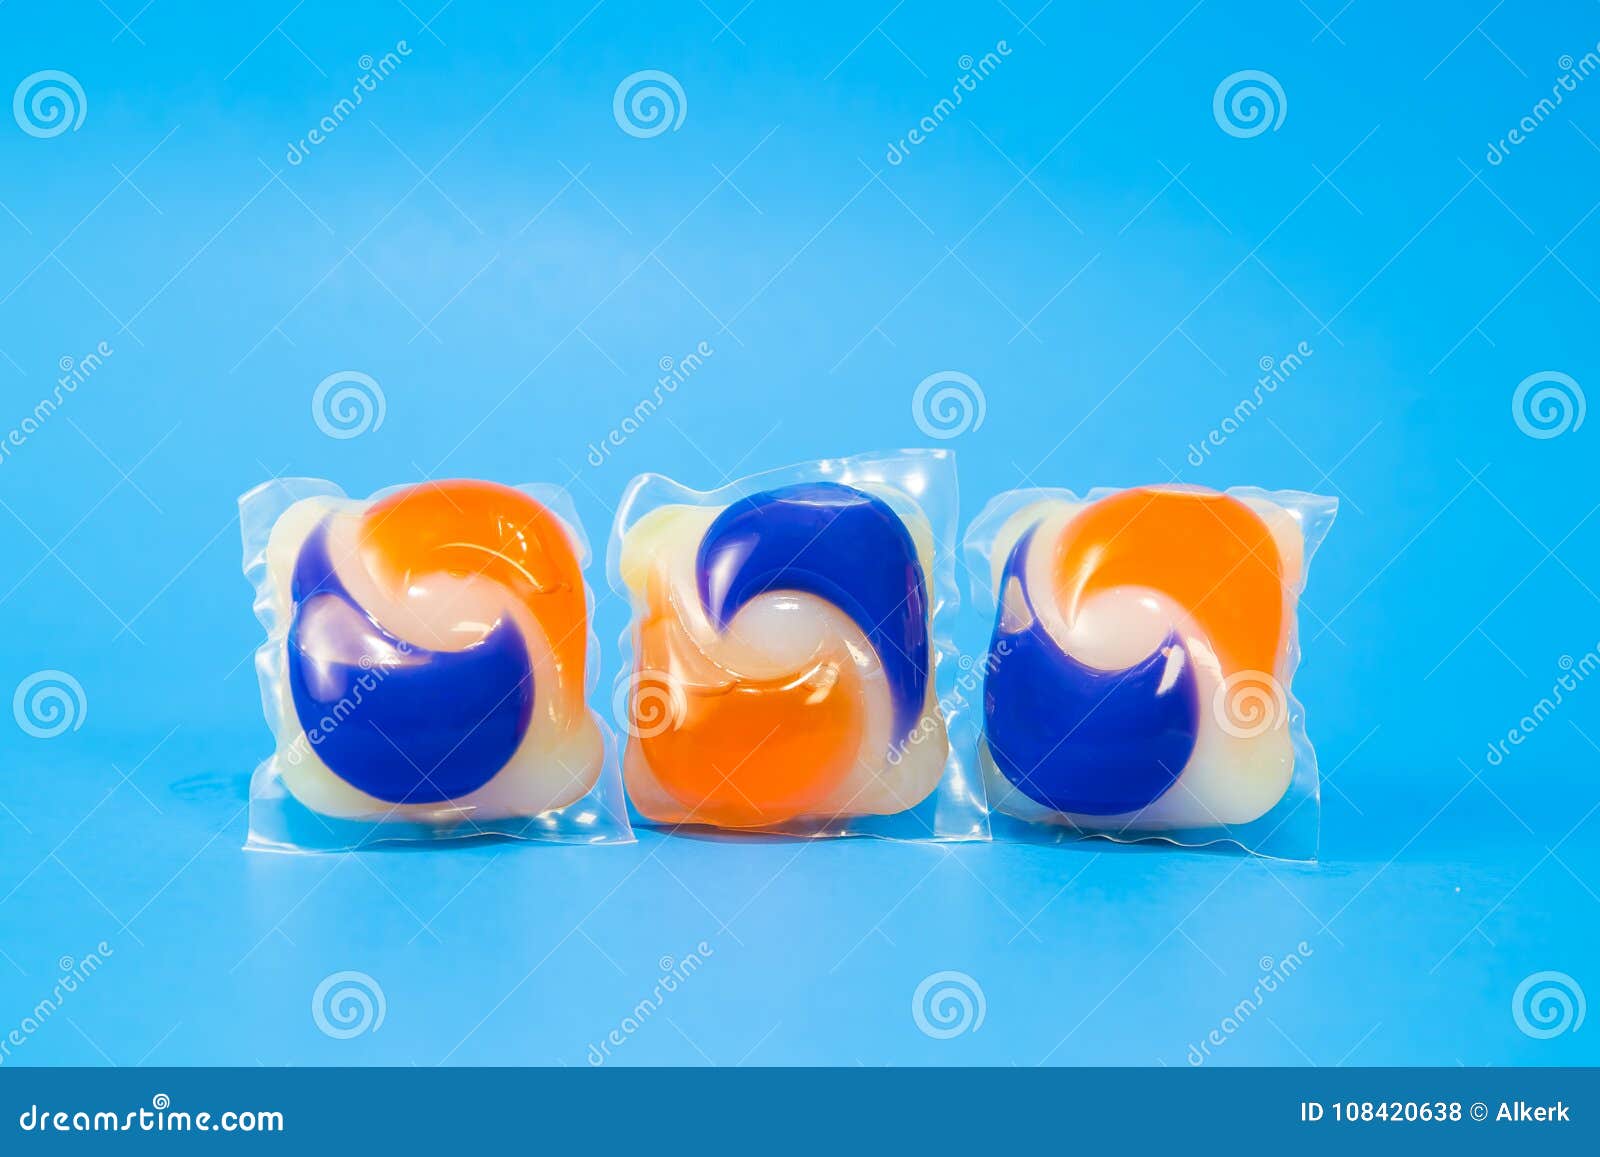 laundry detergent pods capsules on a blue background